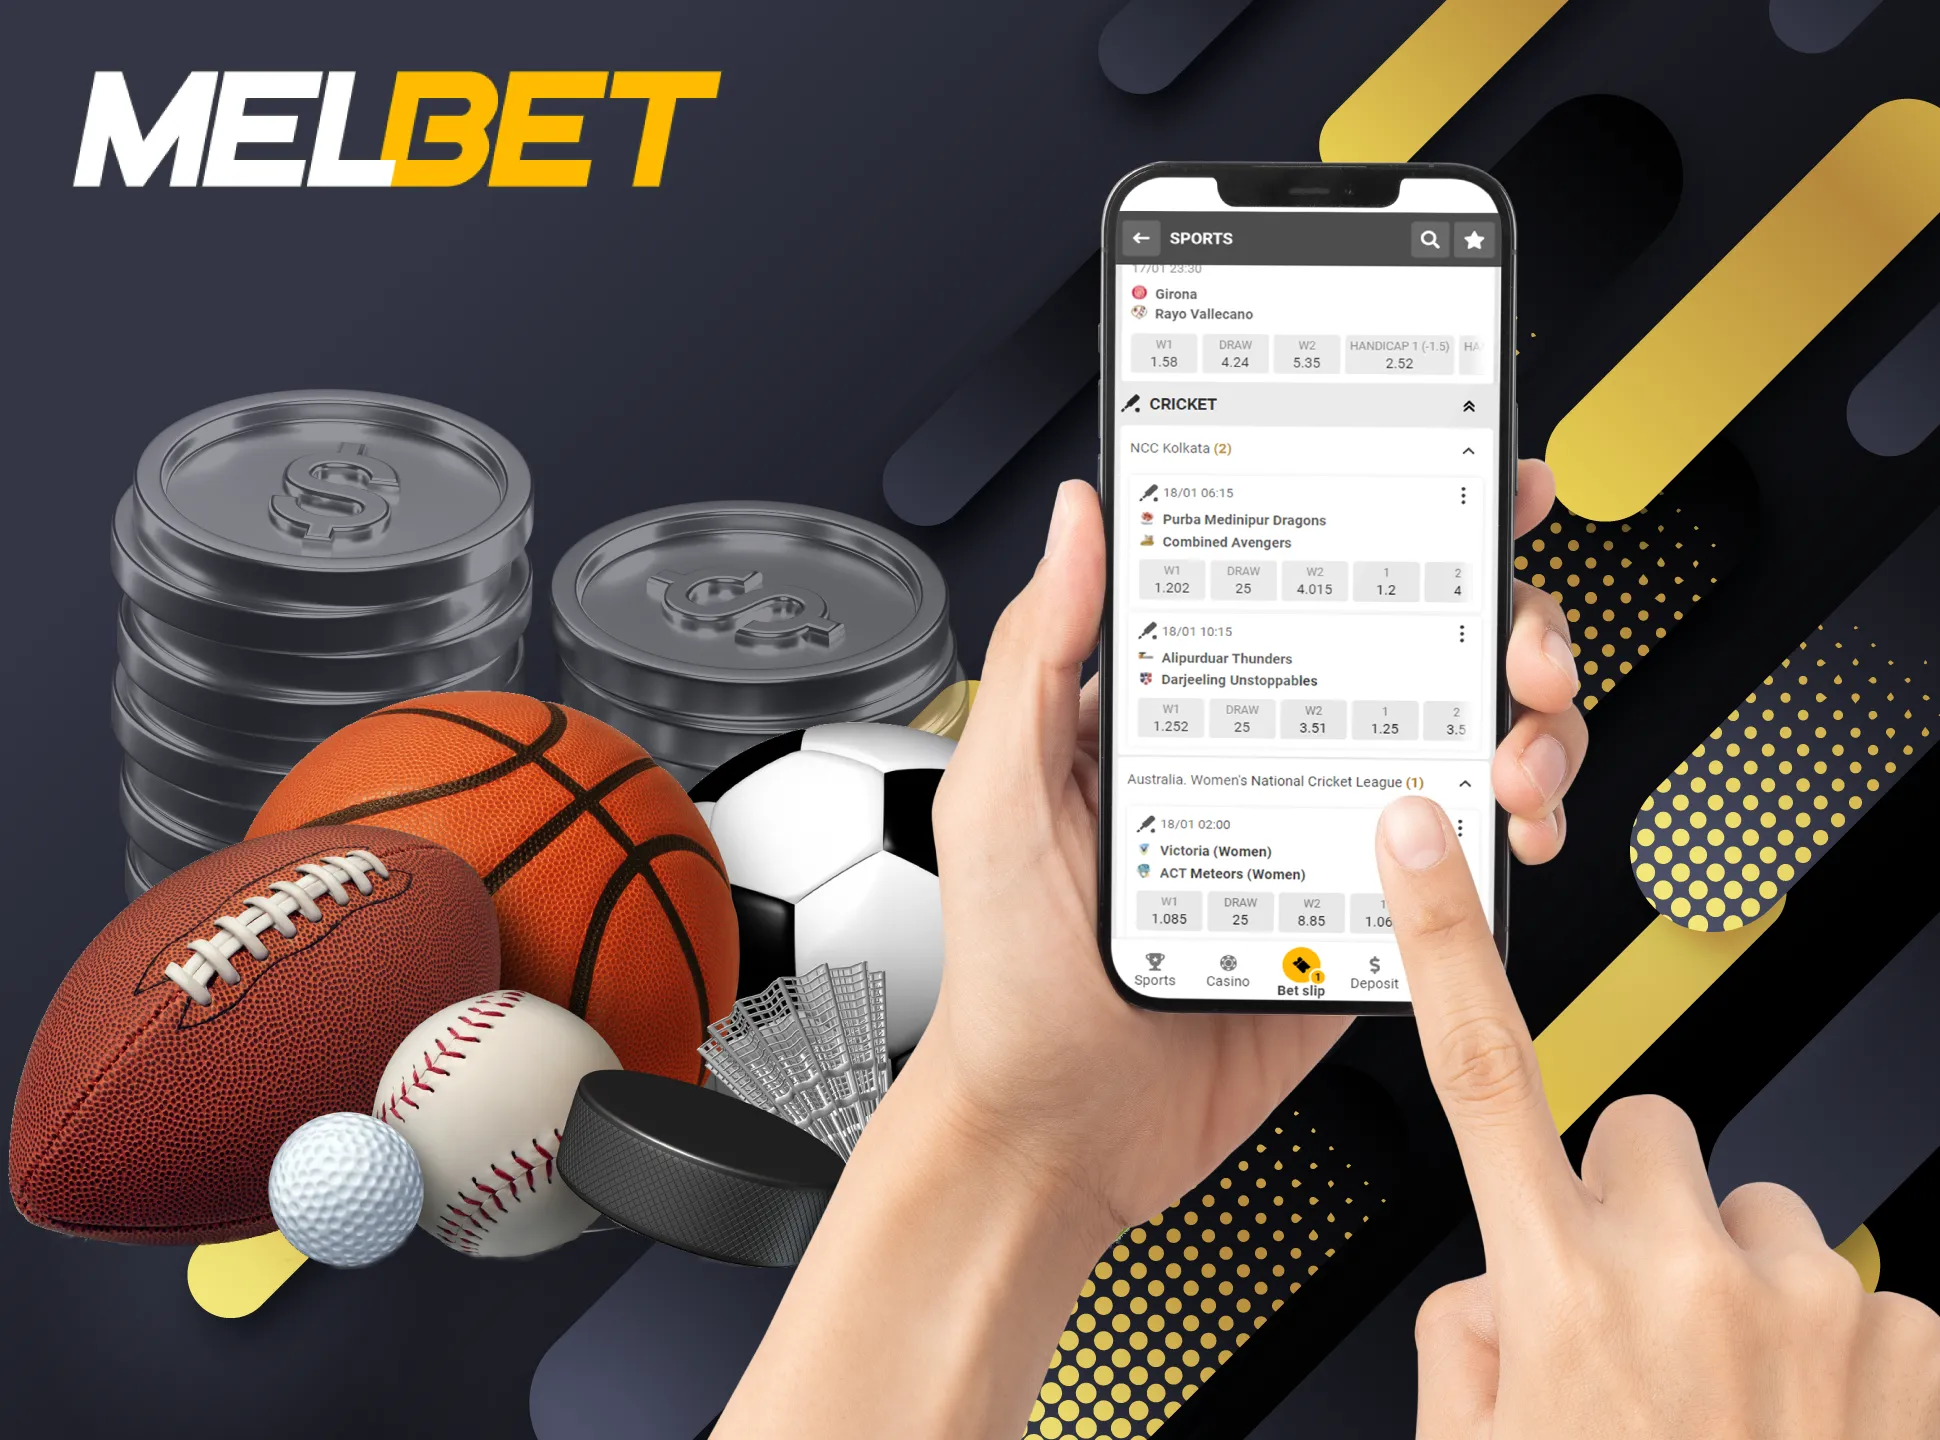 You can bet before or during the match in the Melbet app.